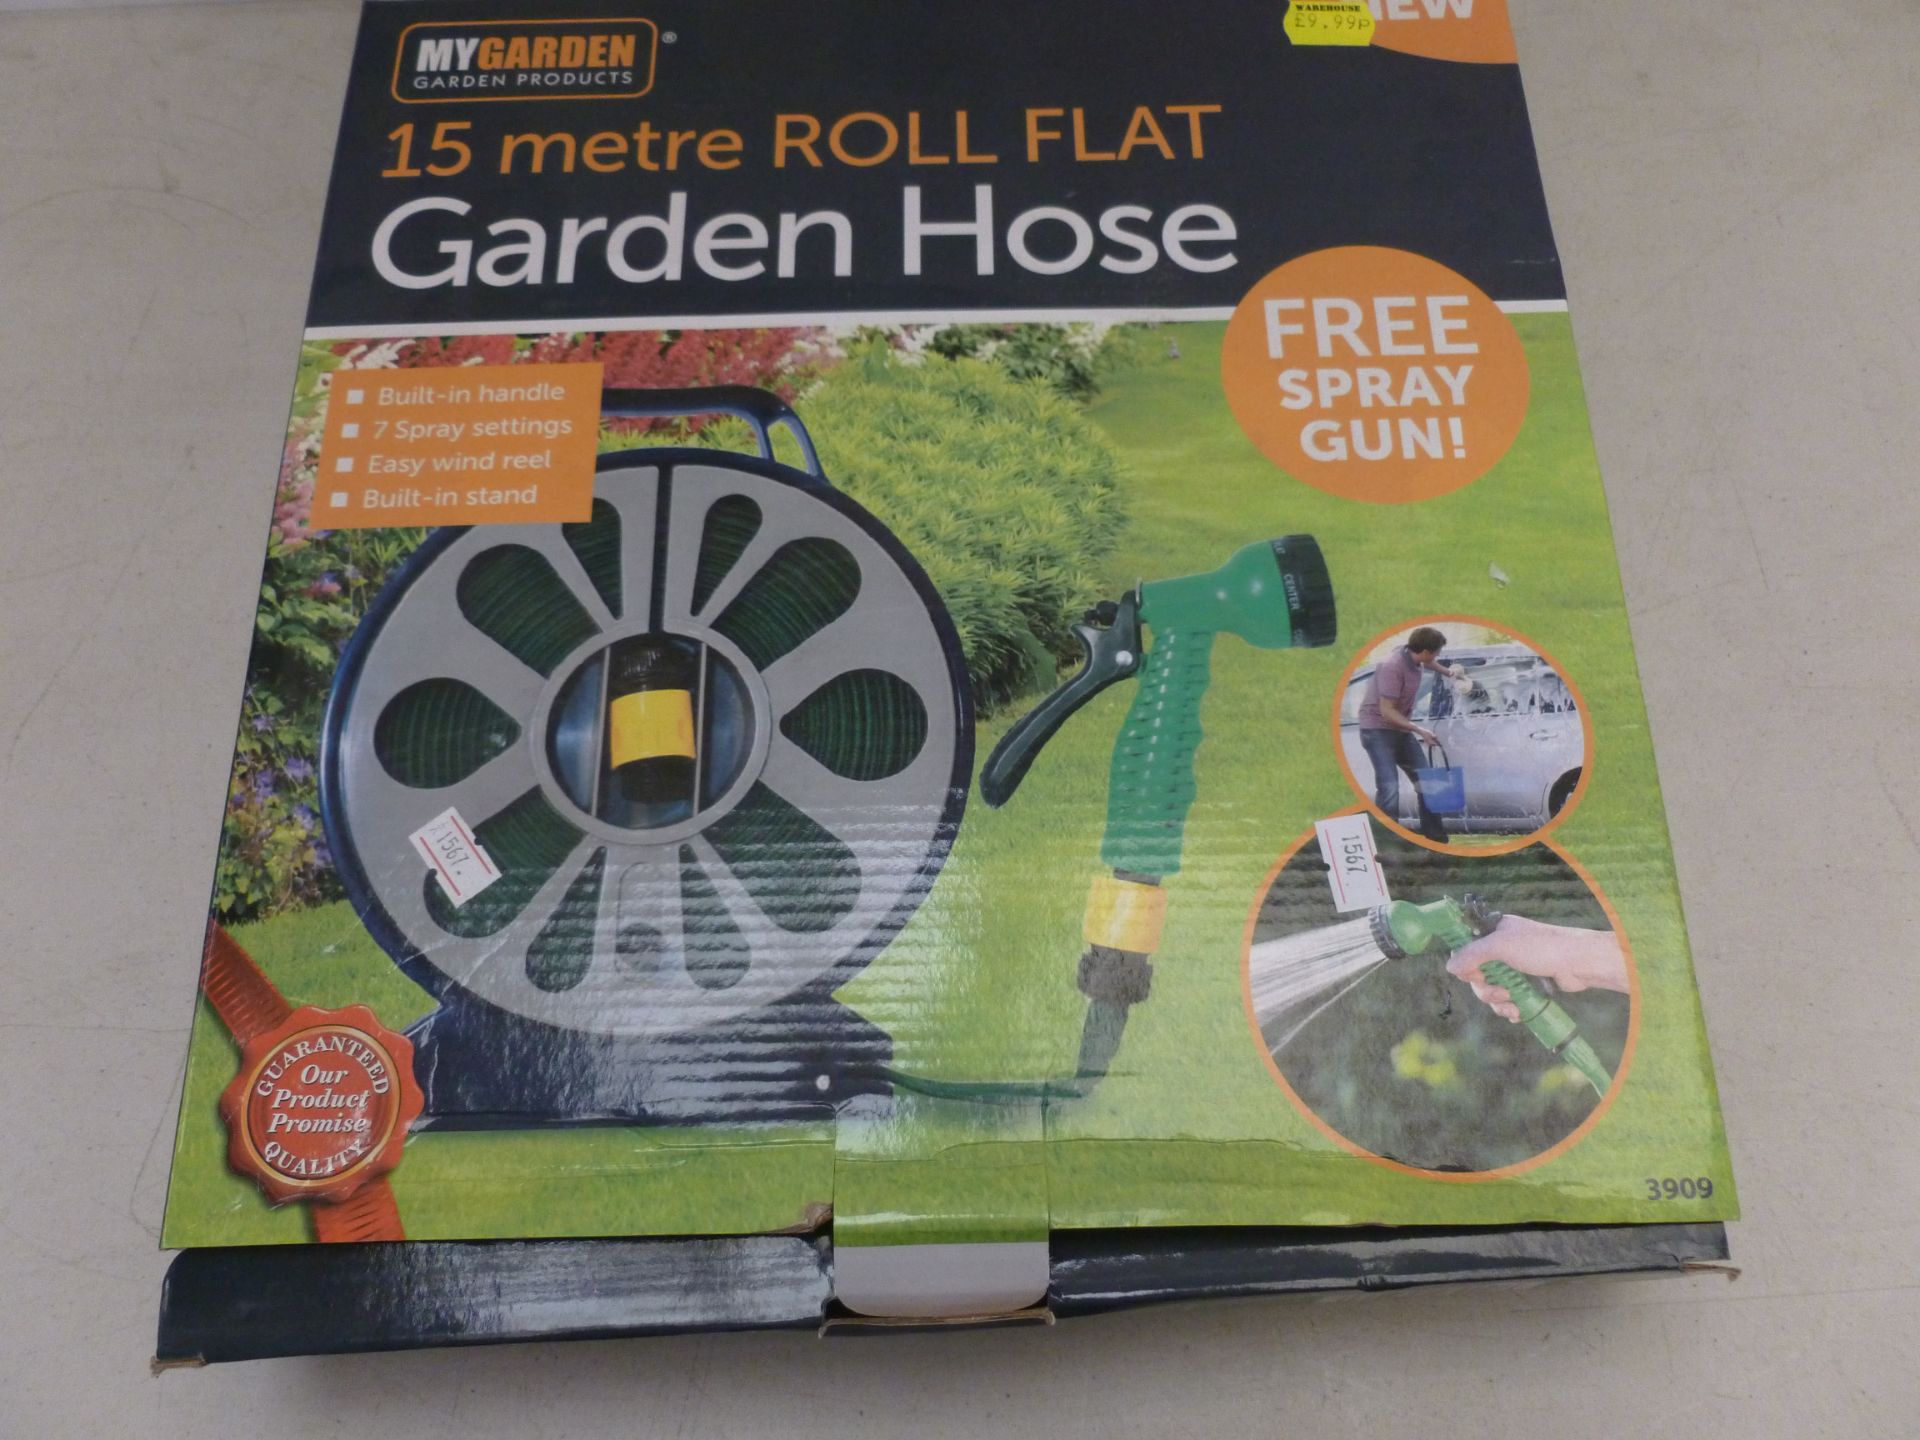 My Garden 15mtr roll flat garden hose, boxed and unchecked